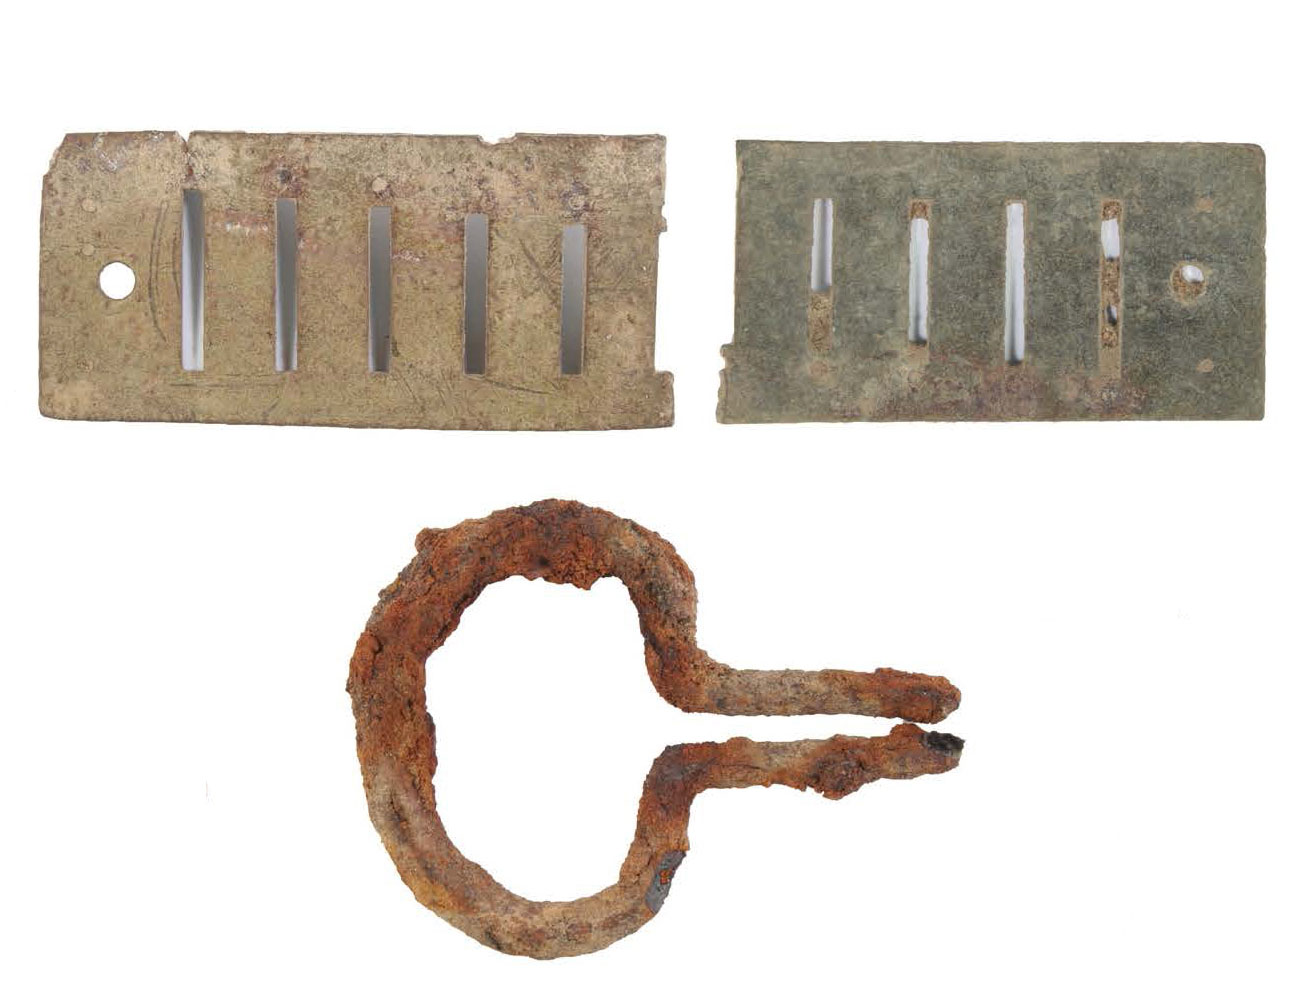 Photo of metal musical instrument artifacts